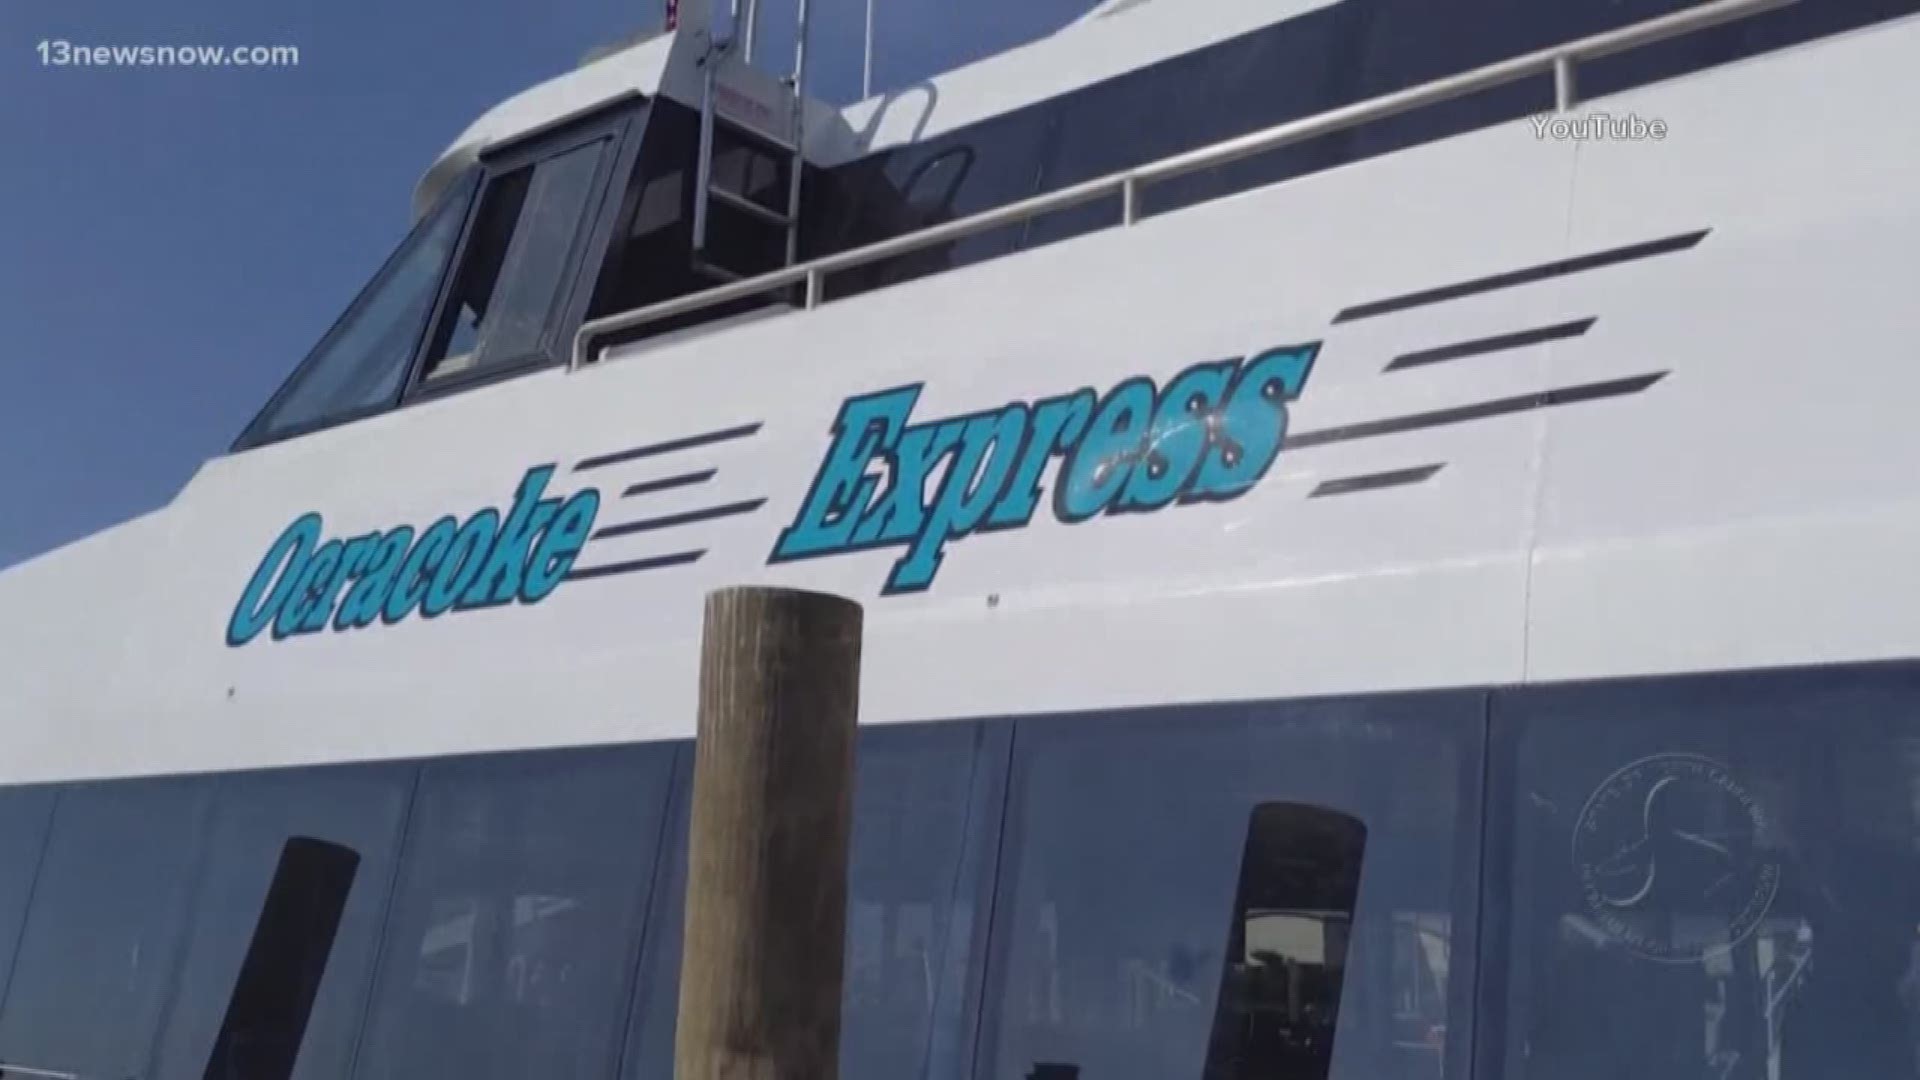 The Ocracoke Express is ending its seasonal service early because of Hurricane Dorian. Its service ended on Labor Day.